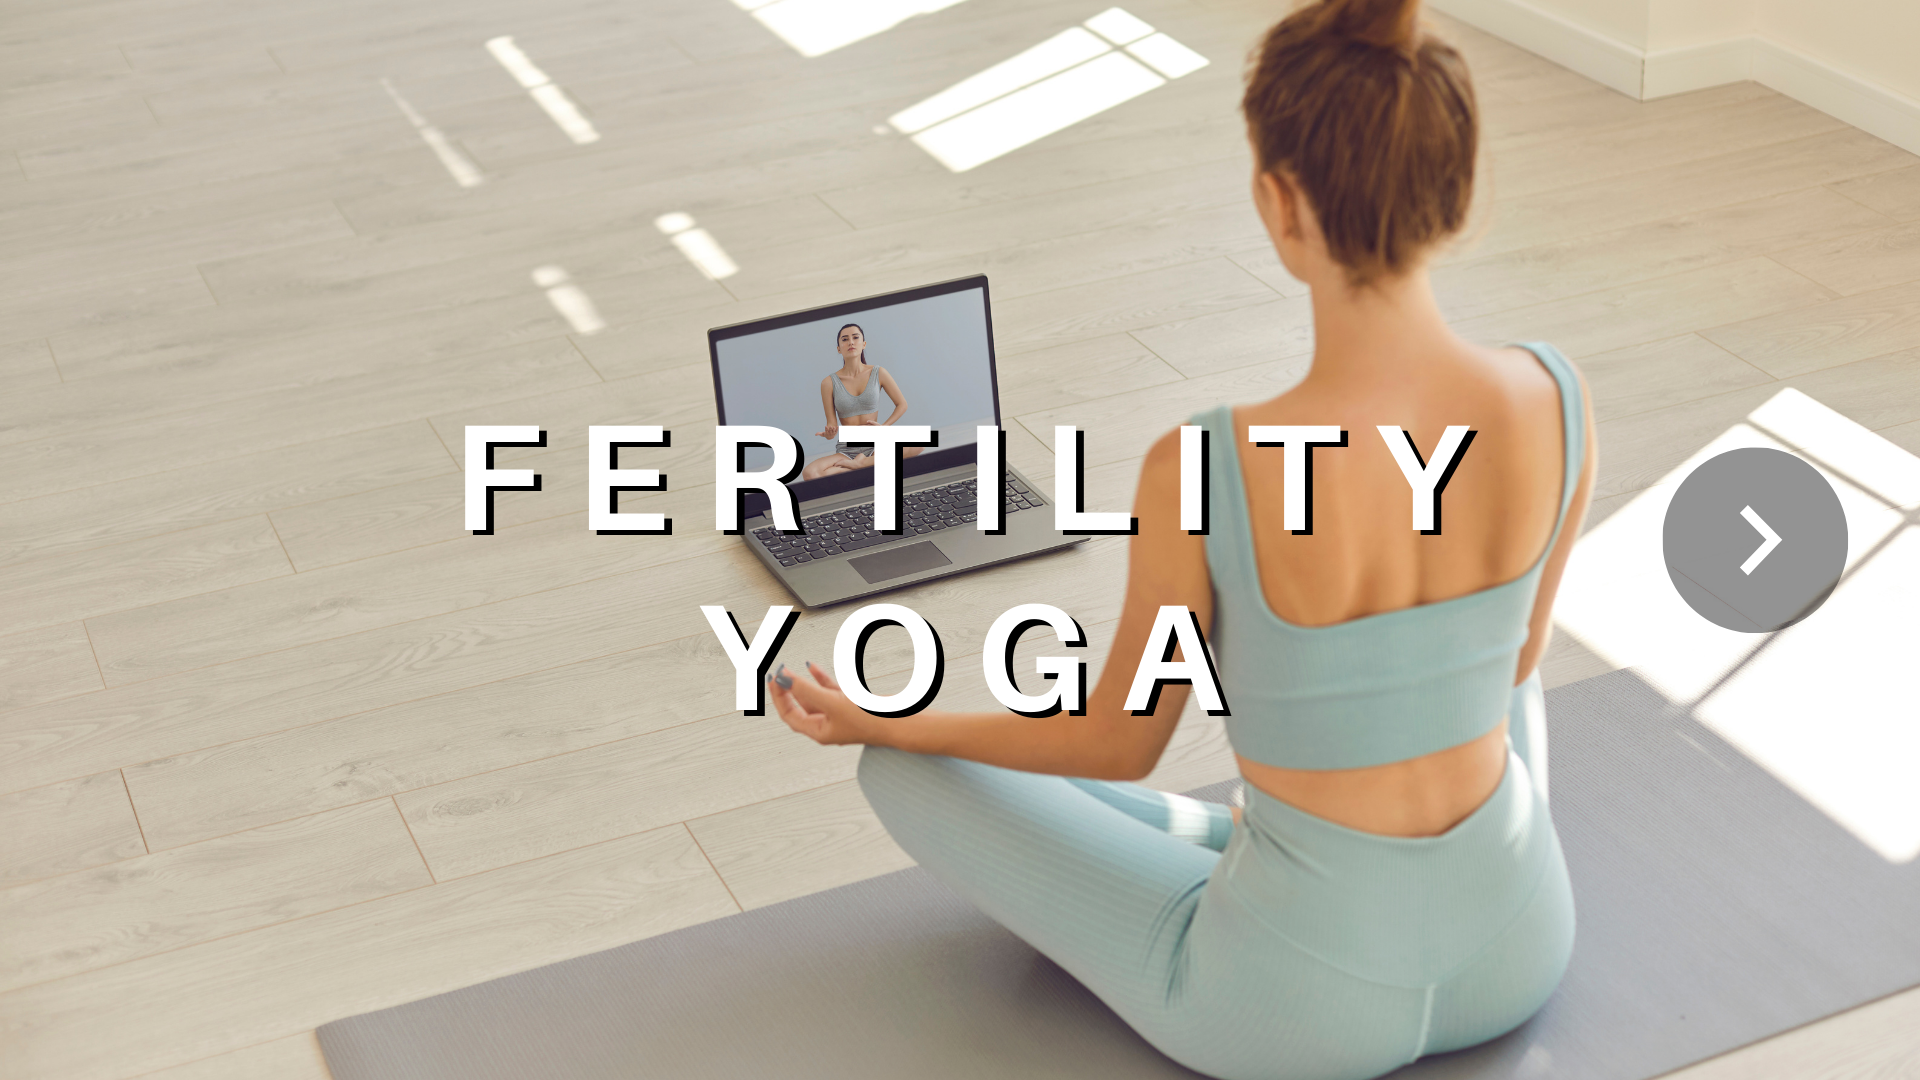 10 Min Yoga For Ovulation, Fertility and Conceiving | Beginner Friendly Yoga  For Conception - YouTube